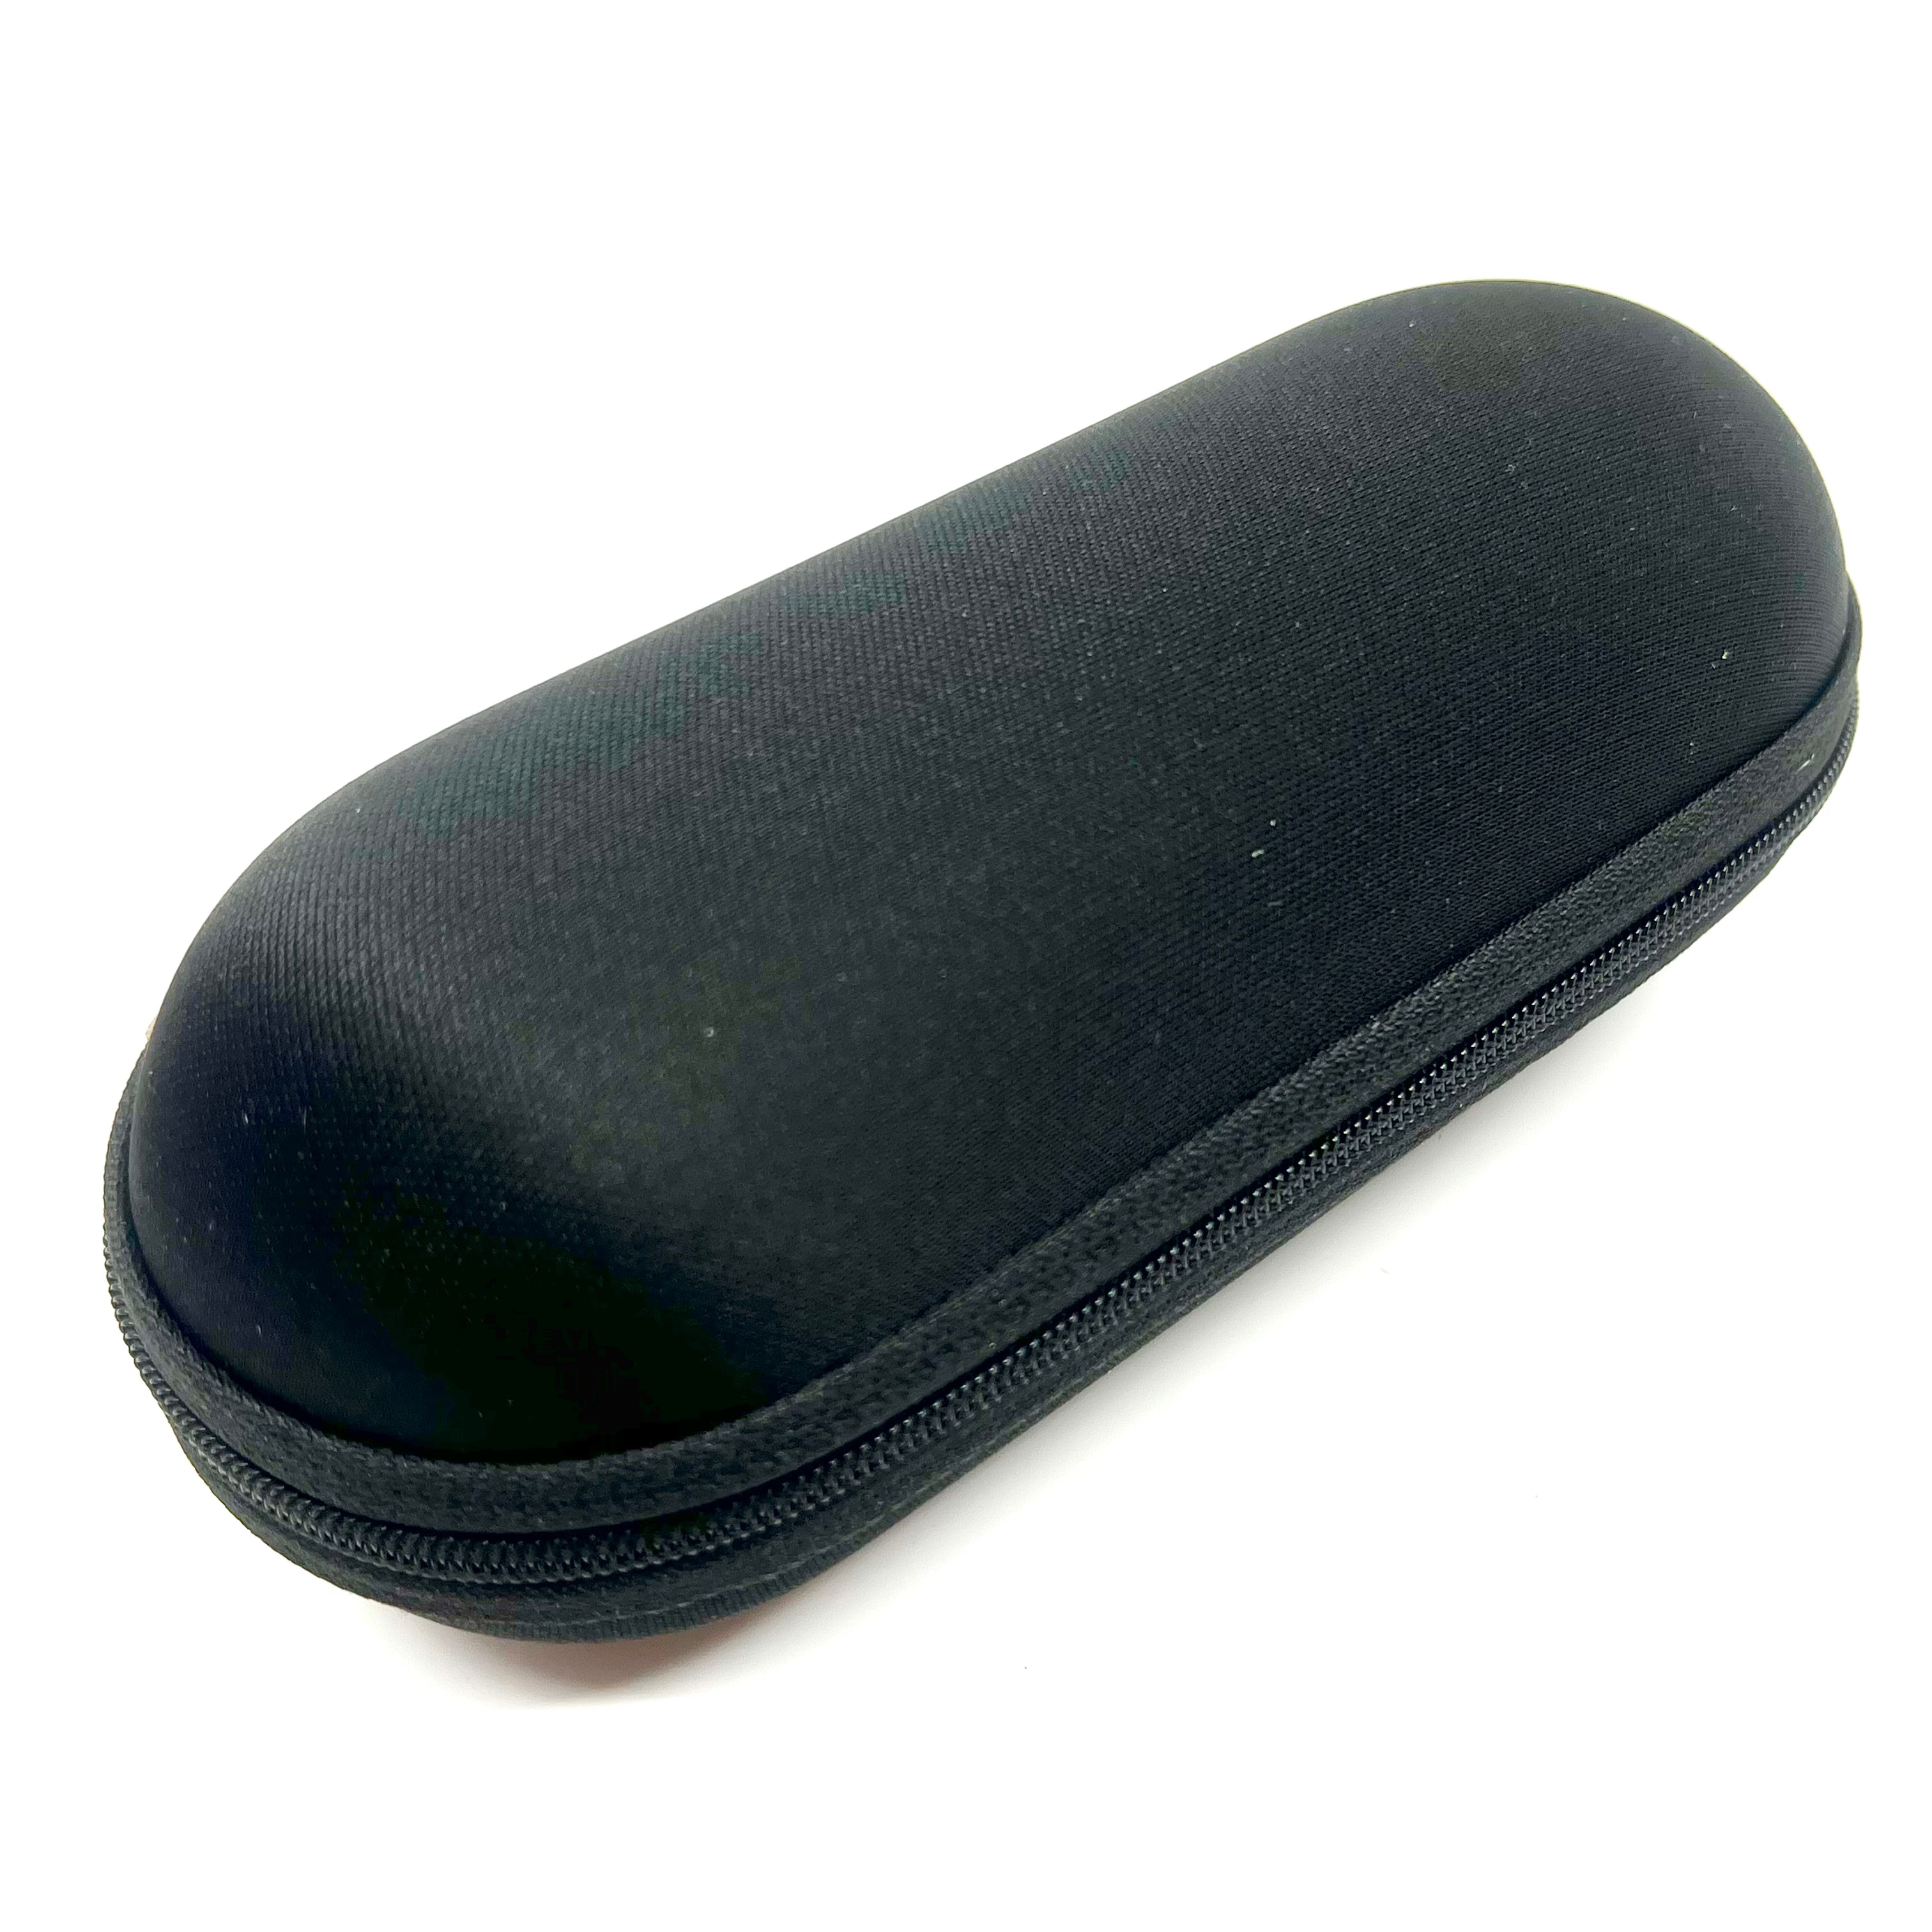 RYOT Accessories Padded Pipe Case